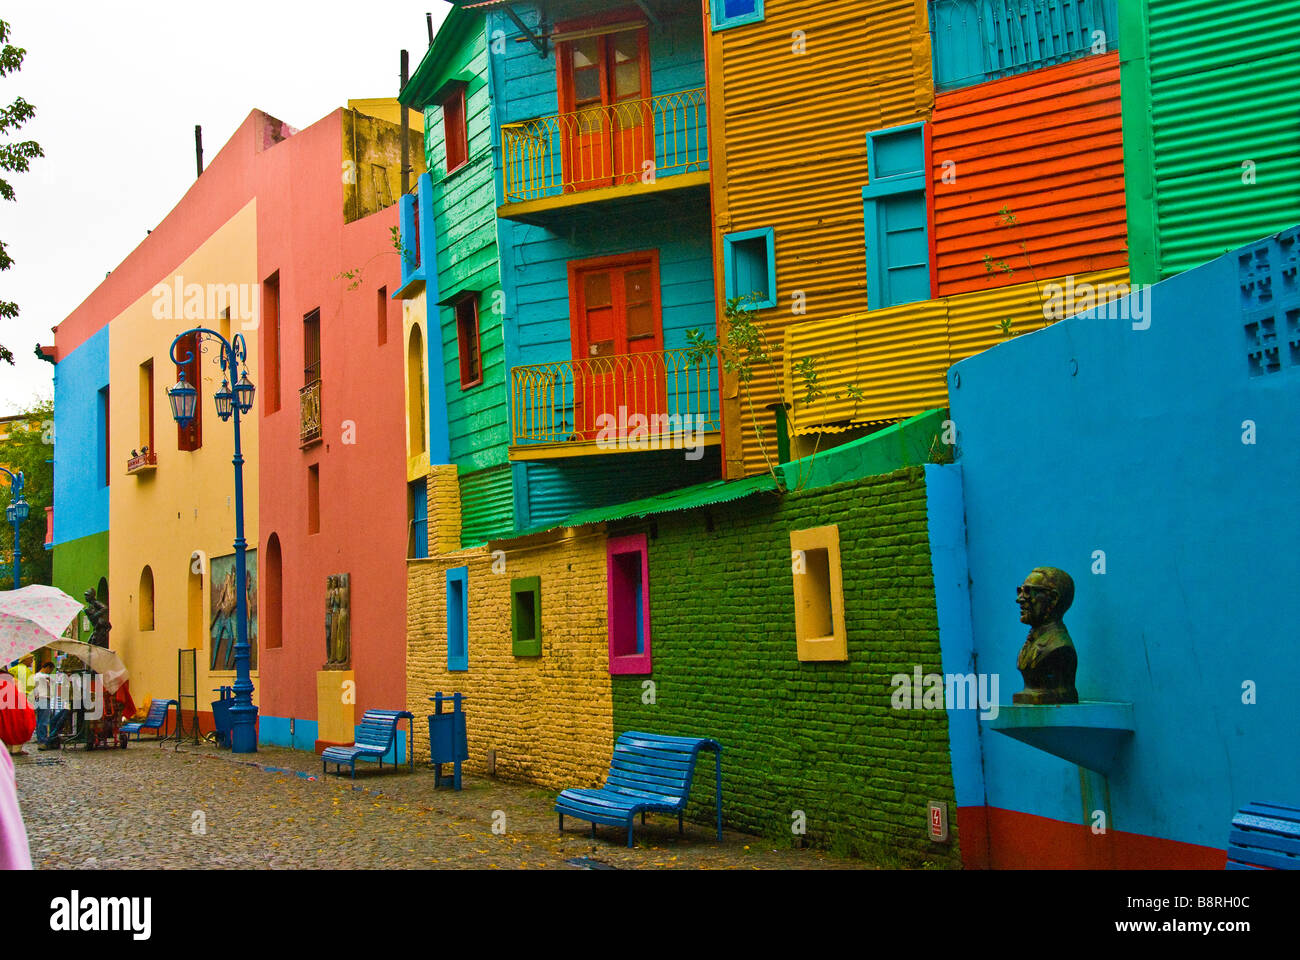 A view from the street in the Buenos Aires neighborhood of La Boca, Argentina Stock Photo